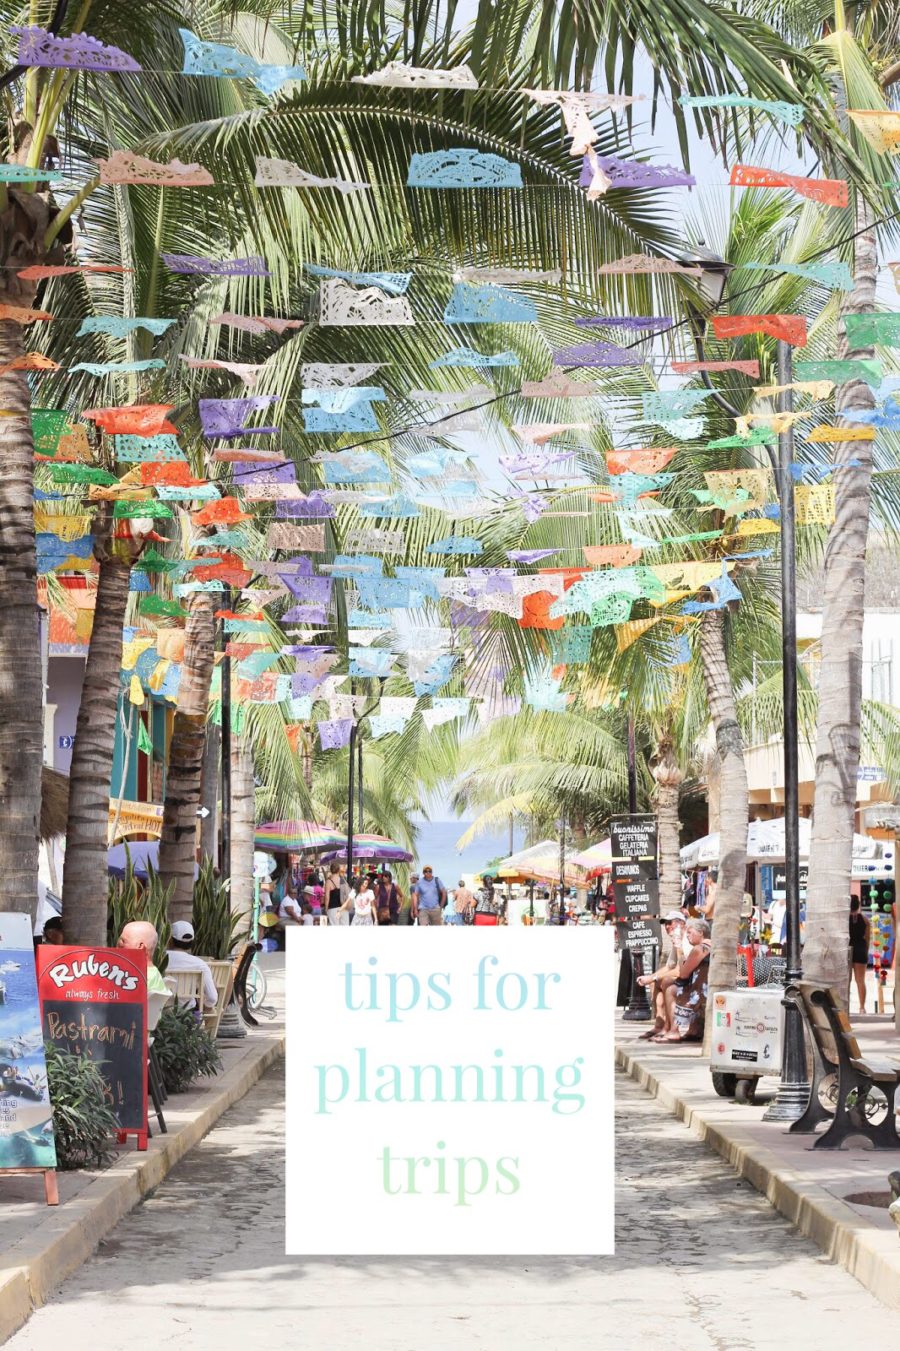 tips for planning trips